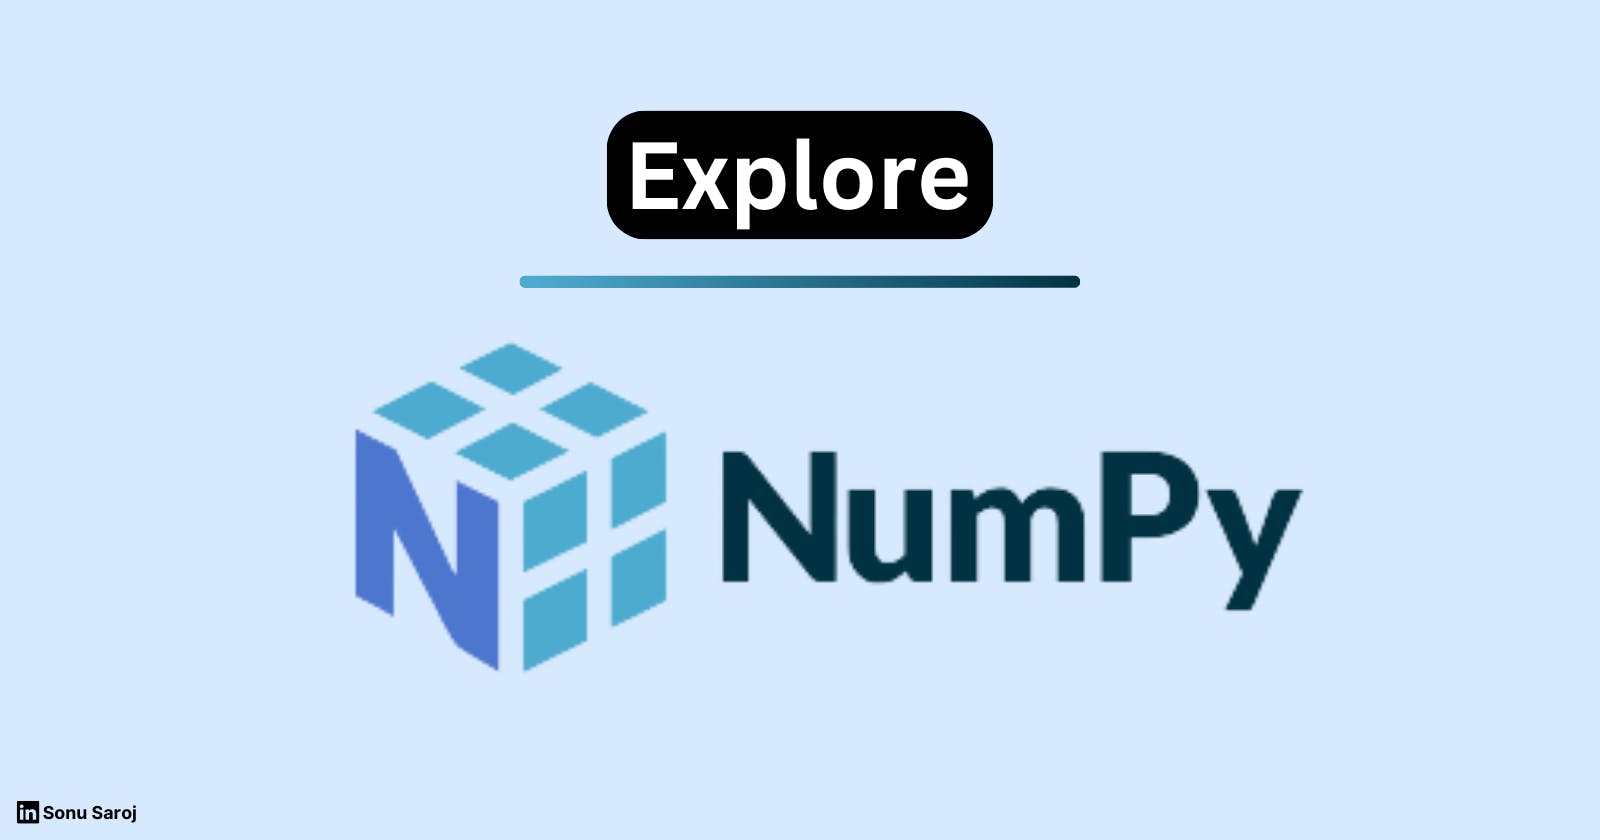 Getting Started with Numpy